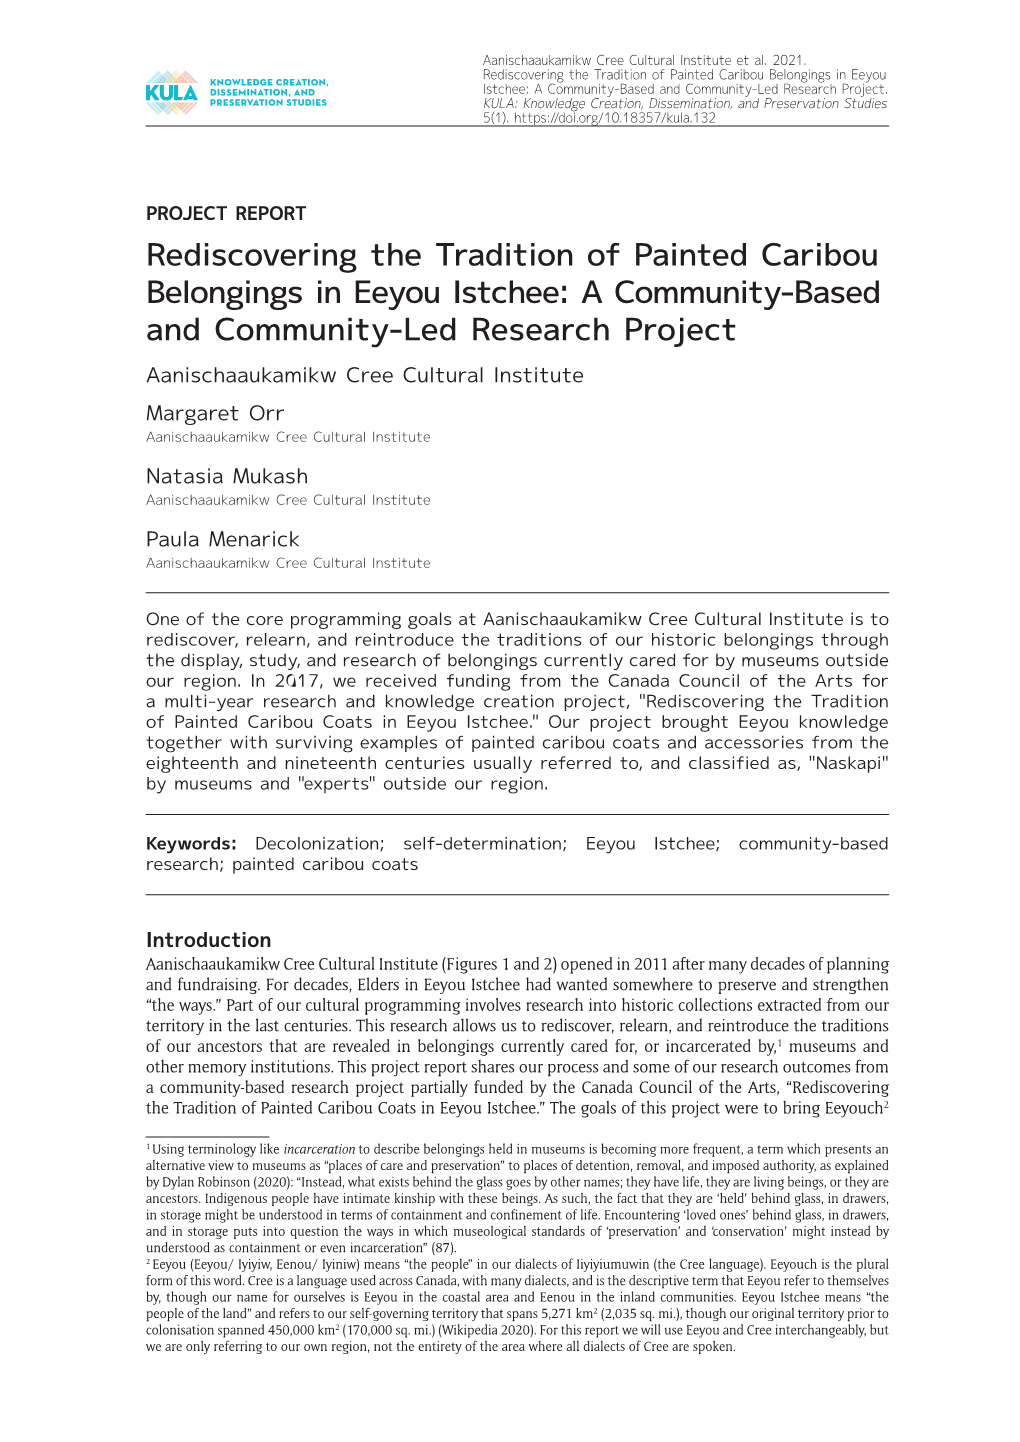 Rediscovering the Tradition of Painted Caribou Belongings in Eeyou Istchee: a Community-Based and Community-Led Research Project